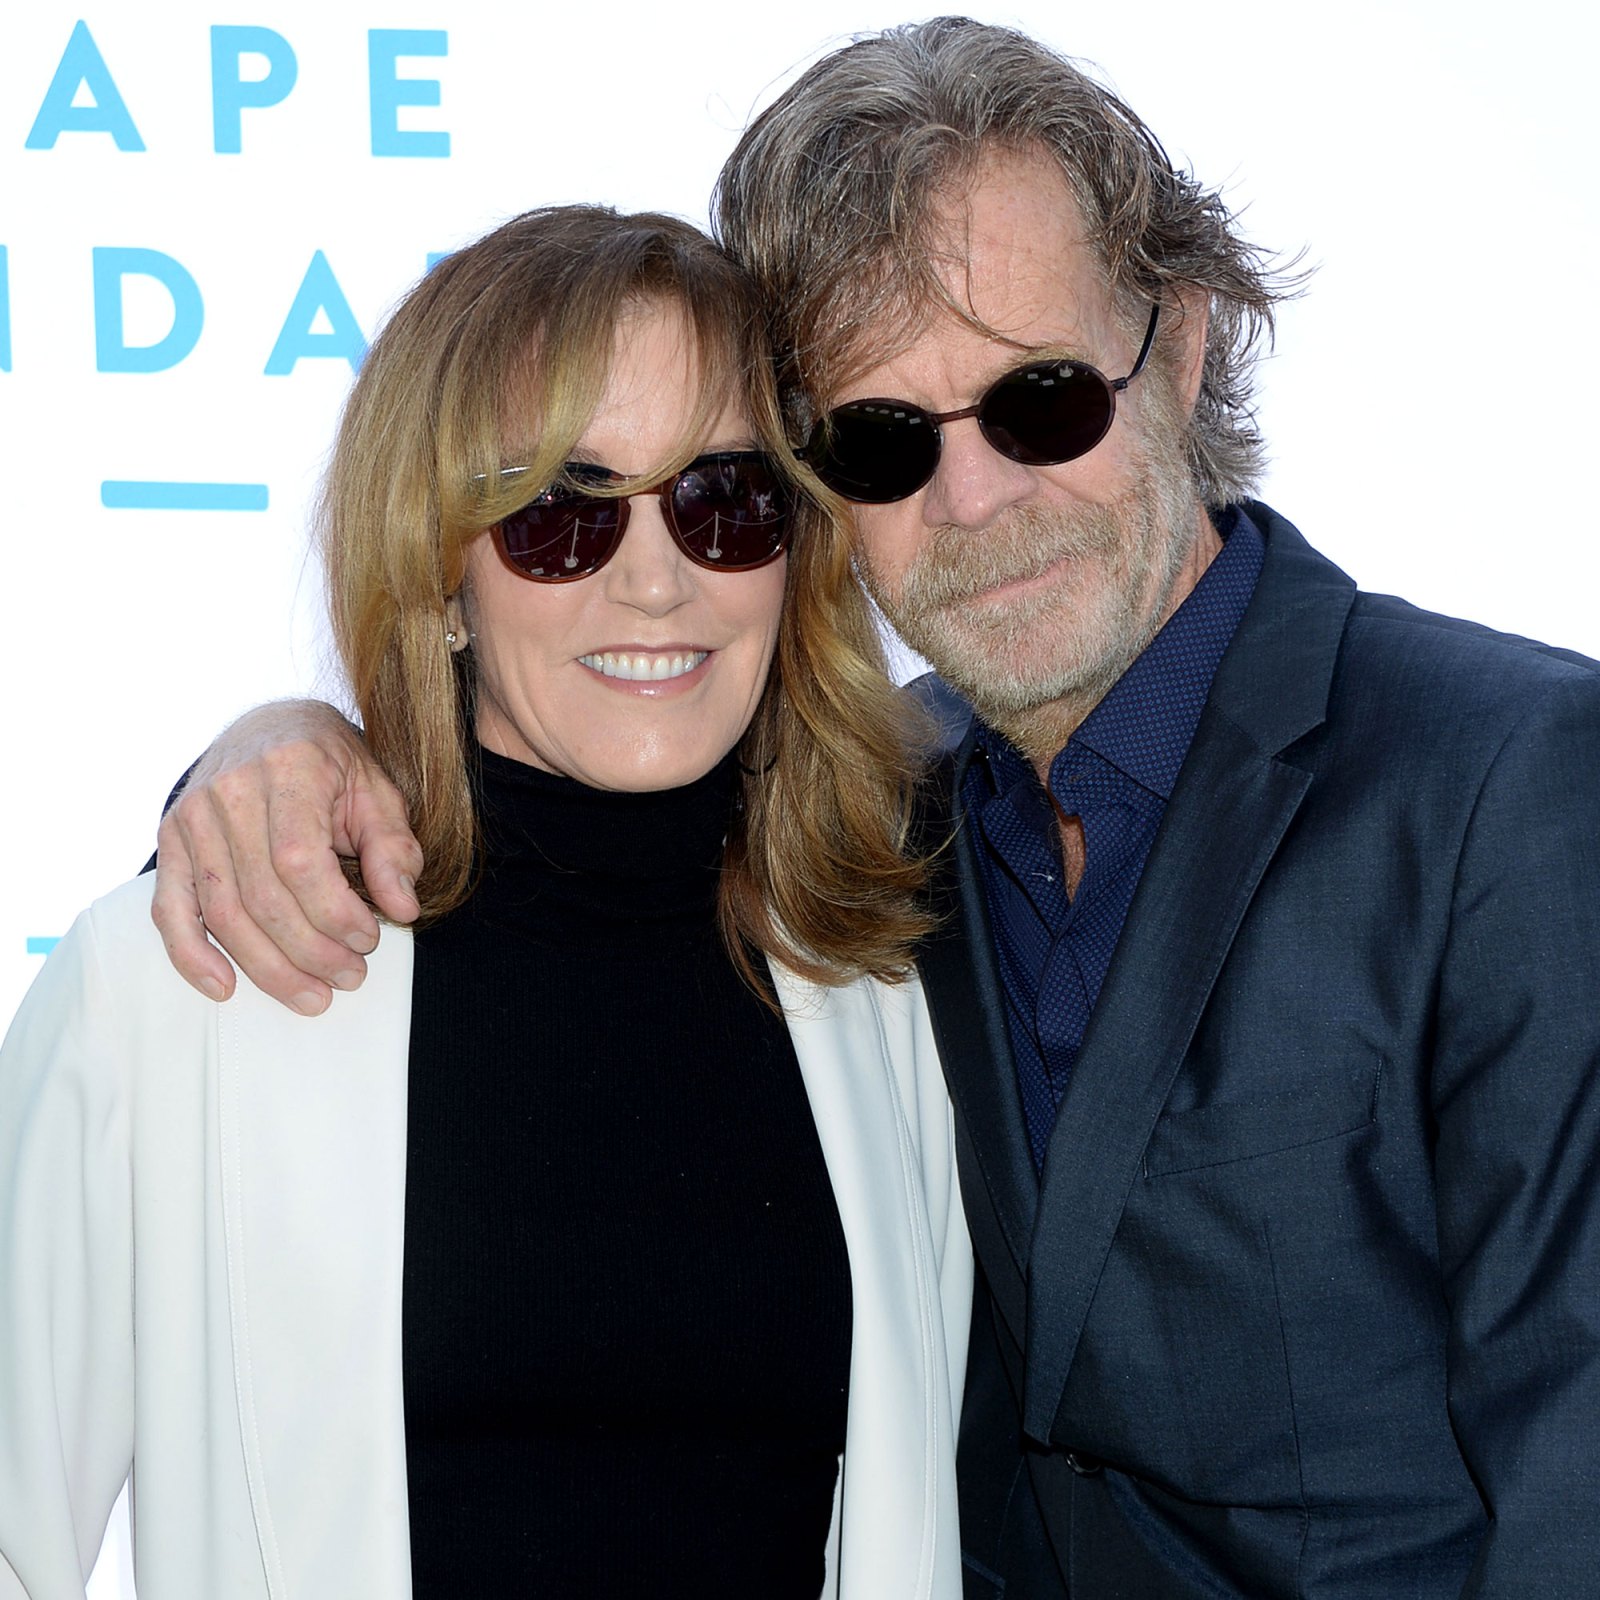 Felicity Huffman and William H. Macy: A Timeline of Their Relationship